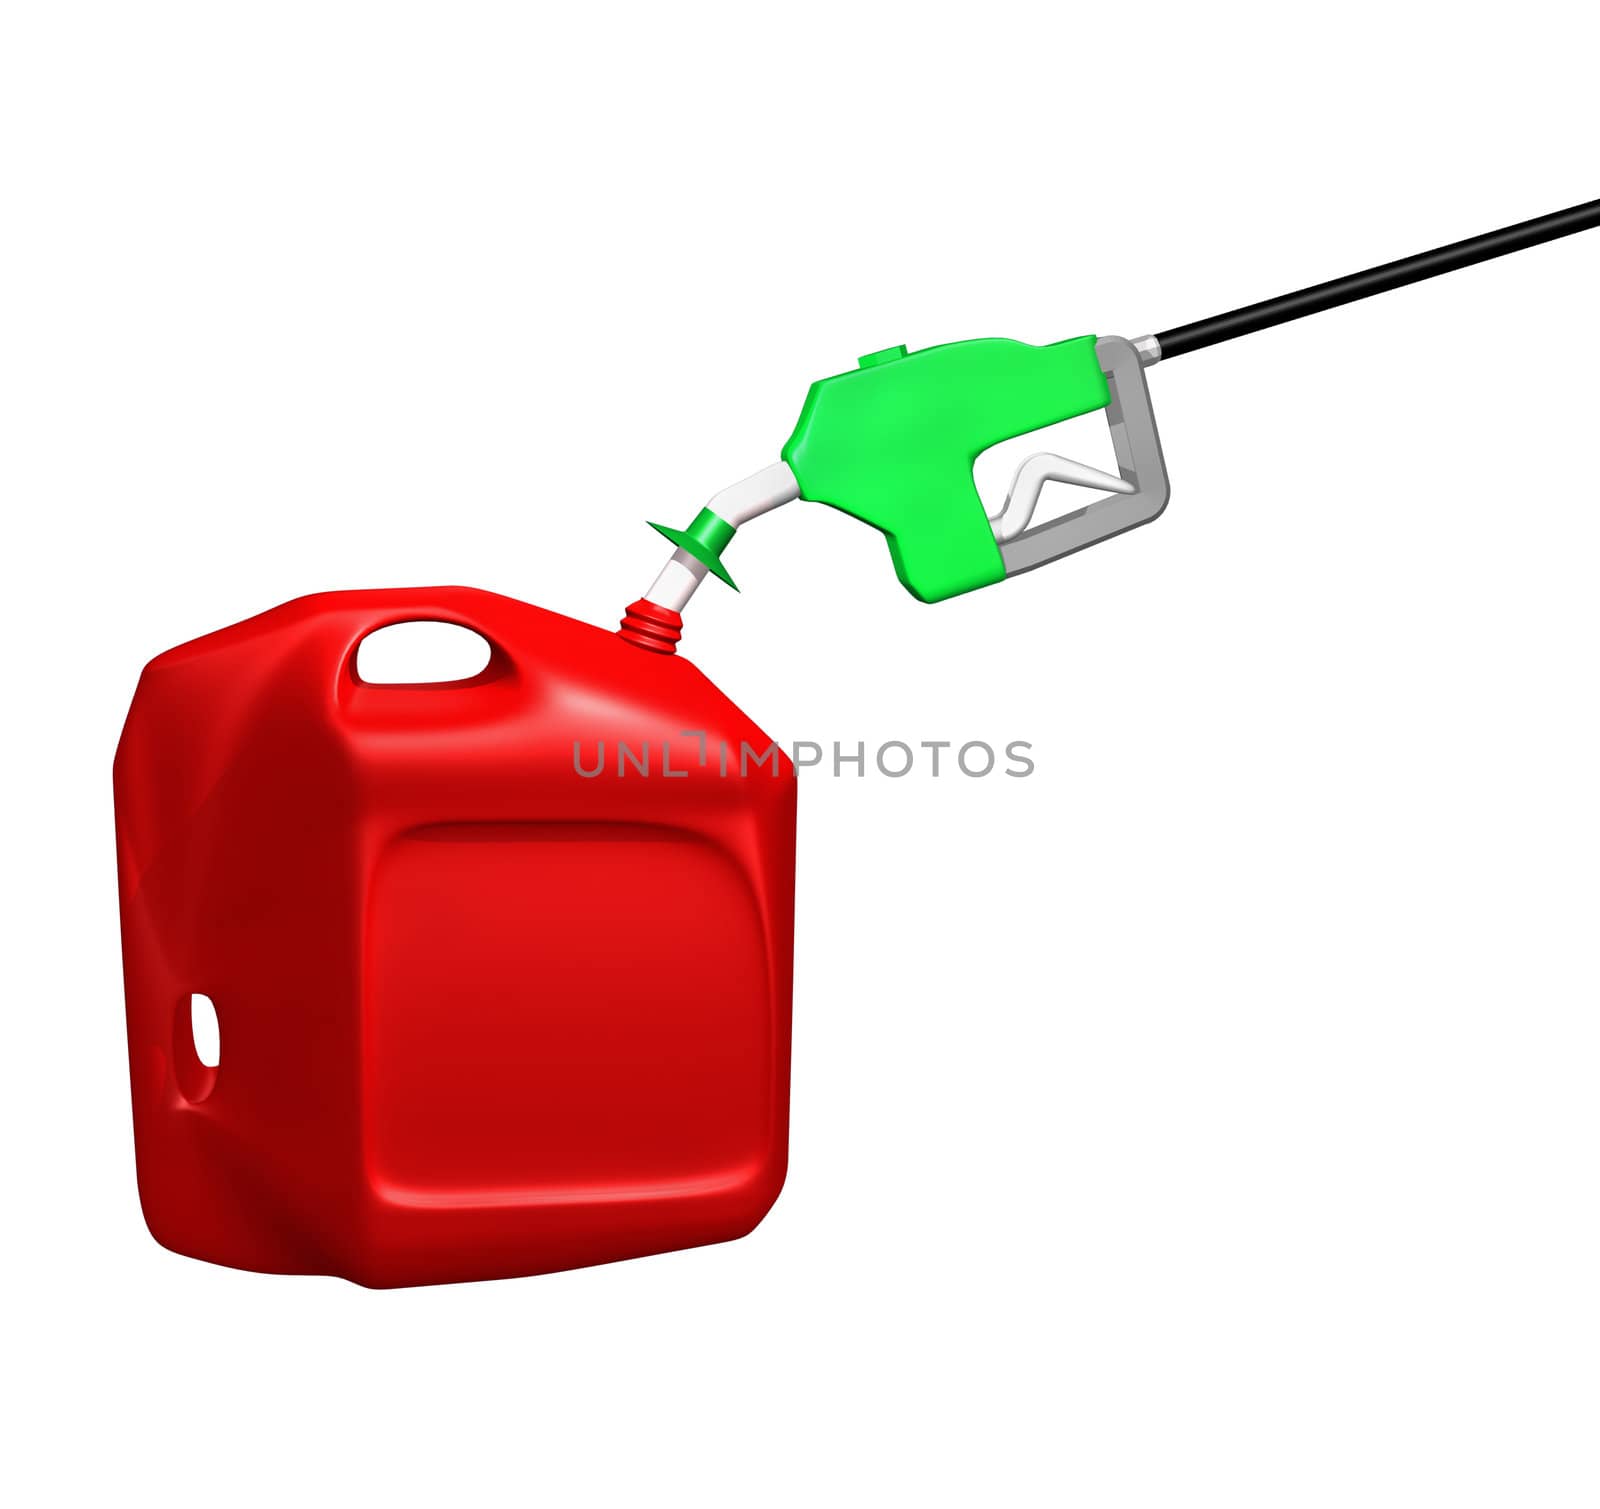 gas concept of nozzle in 5 gallon red plastic gas can isolated on white